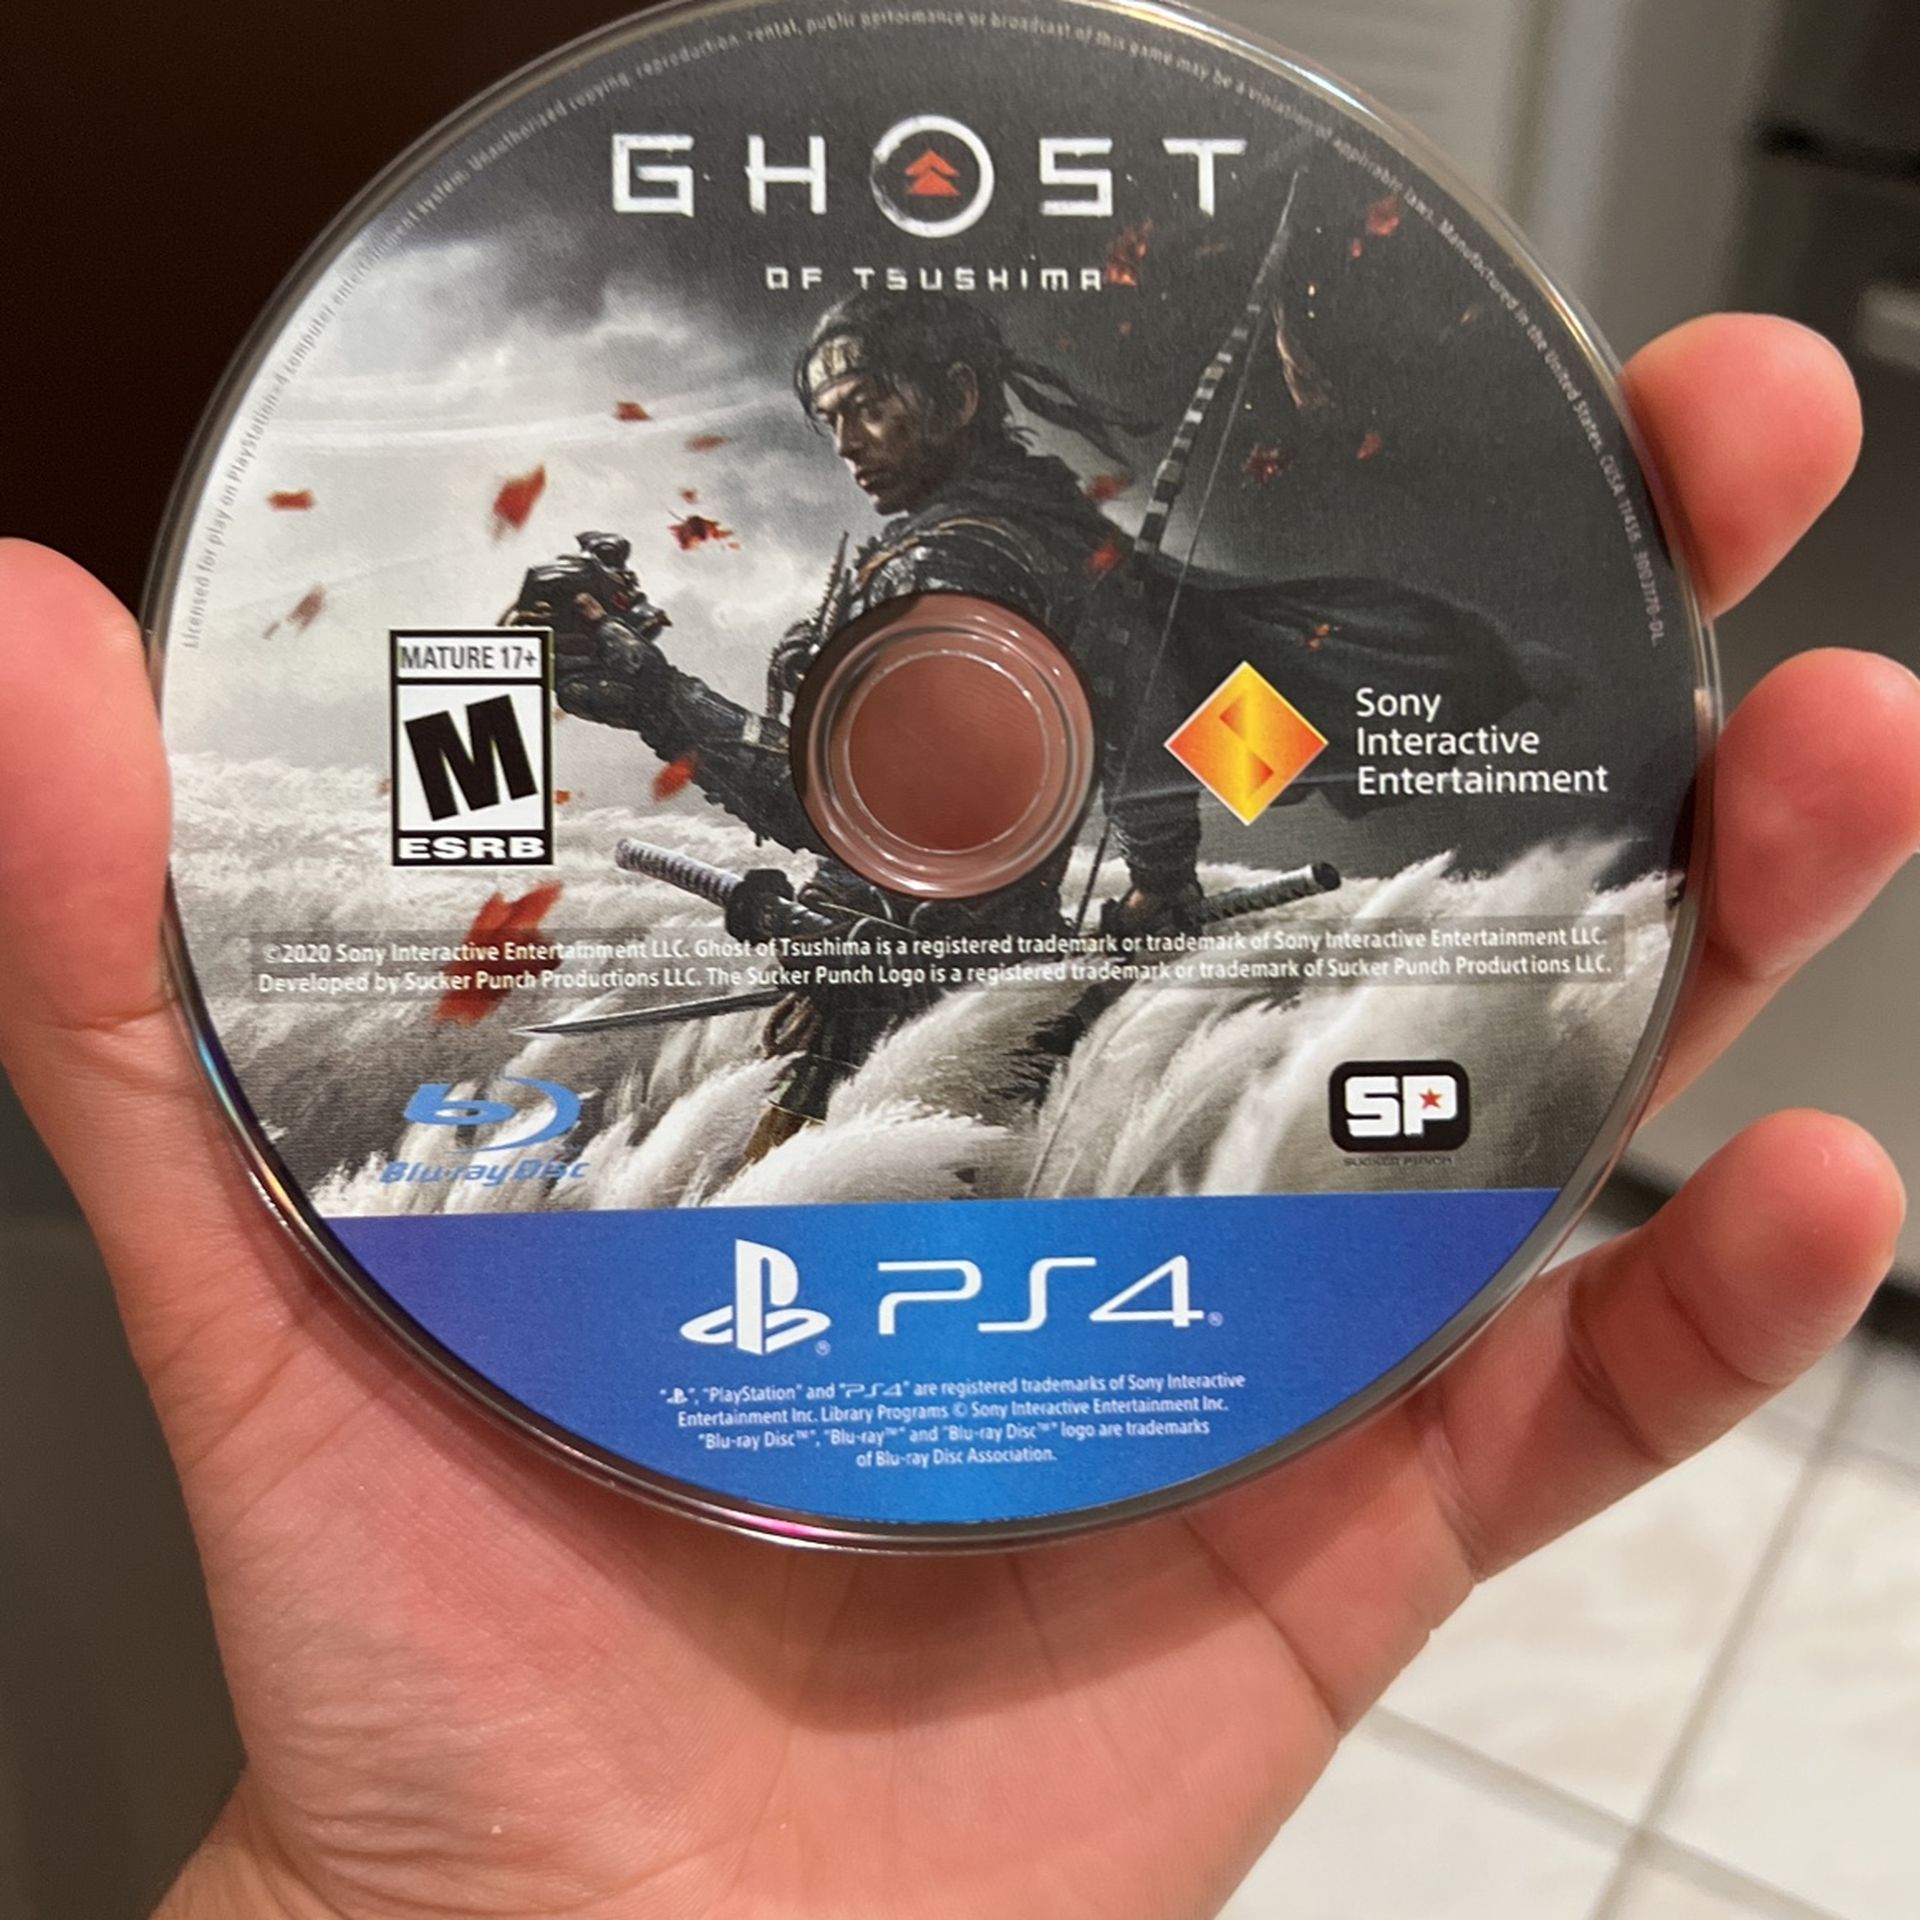 Tsushima Beach, Sale Ghost FL OfferUp Palm Of for West - (PS4) in